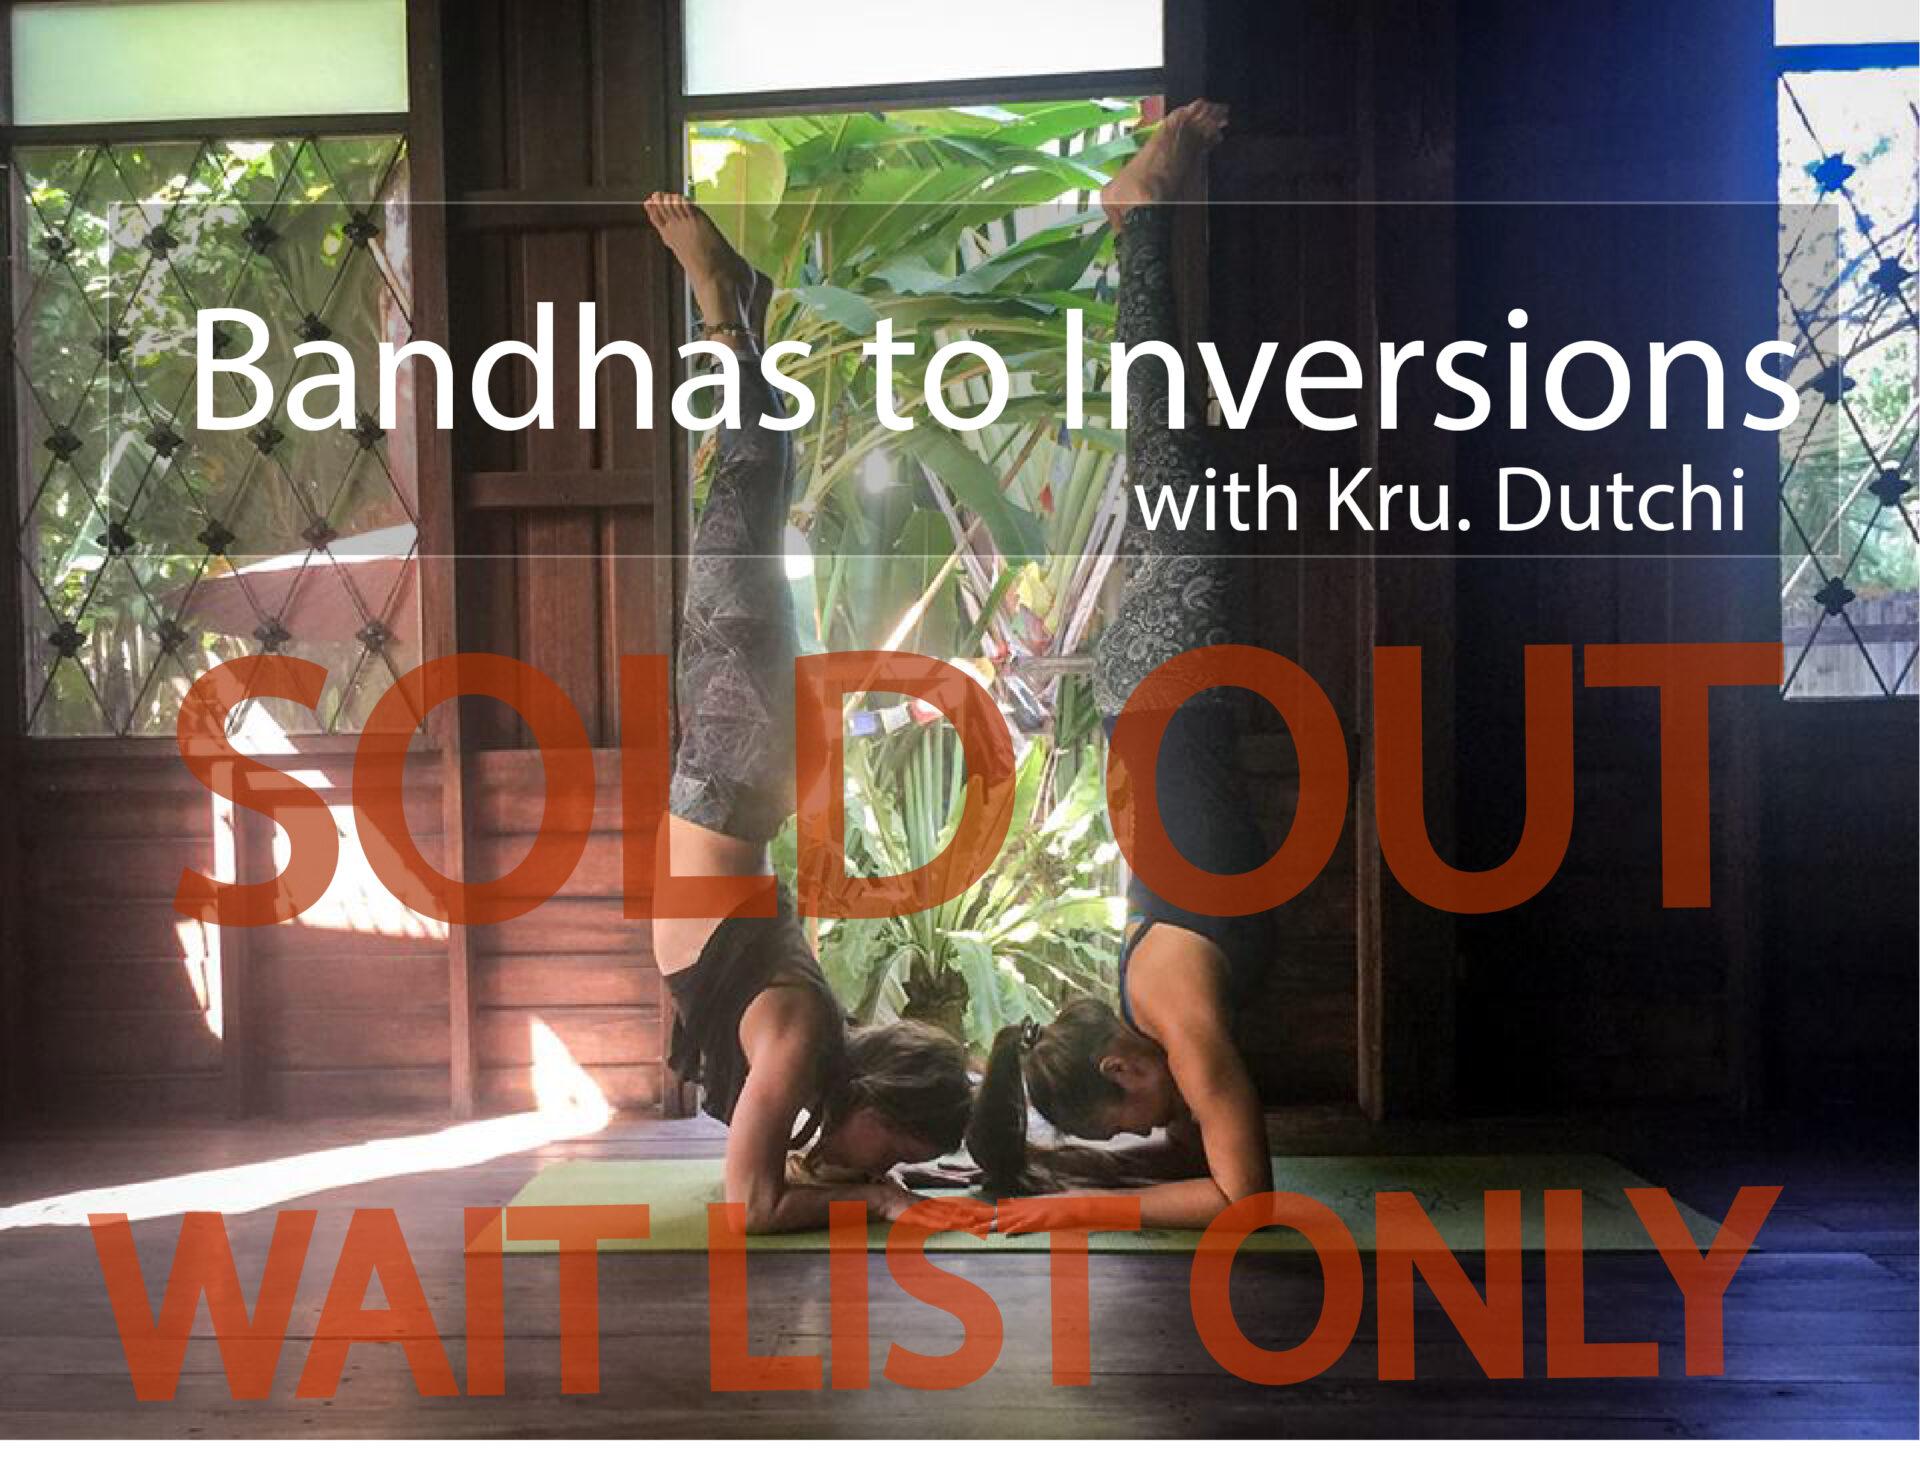 Master yoga teacher Dutchi will teach Basndhas to Inversions at Wild Rose Yoga Chiang Mai on July 30th 2019